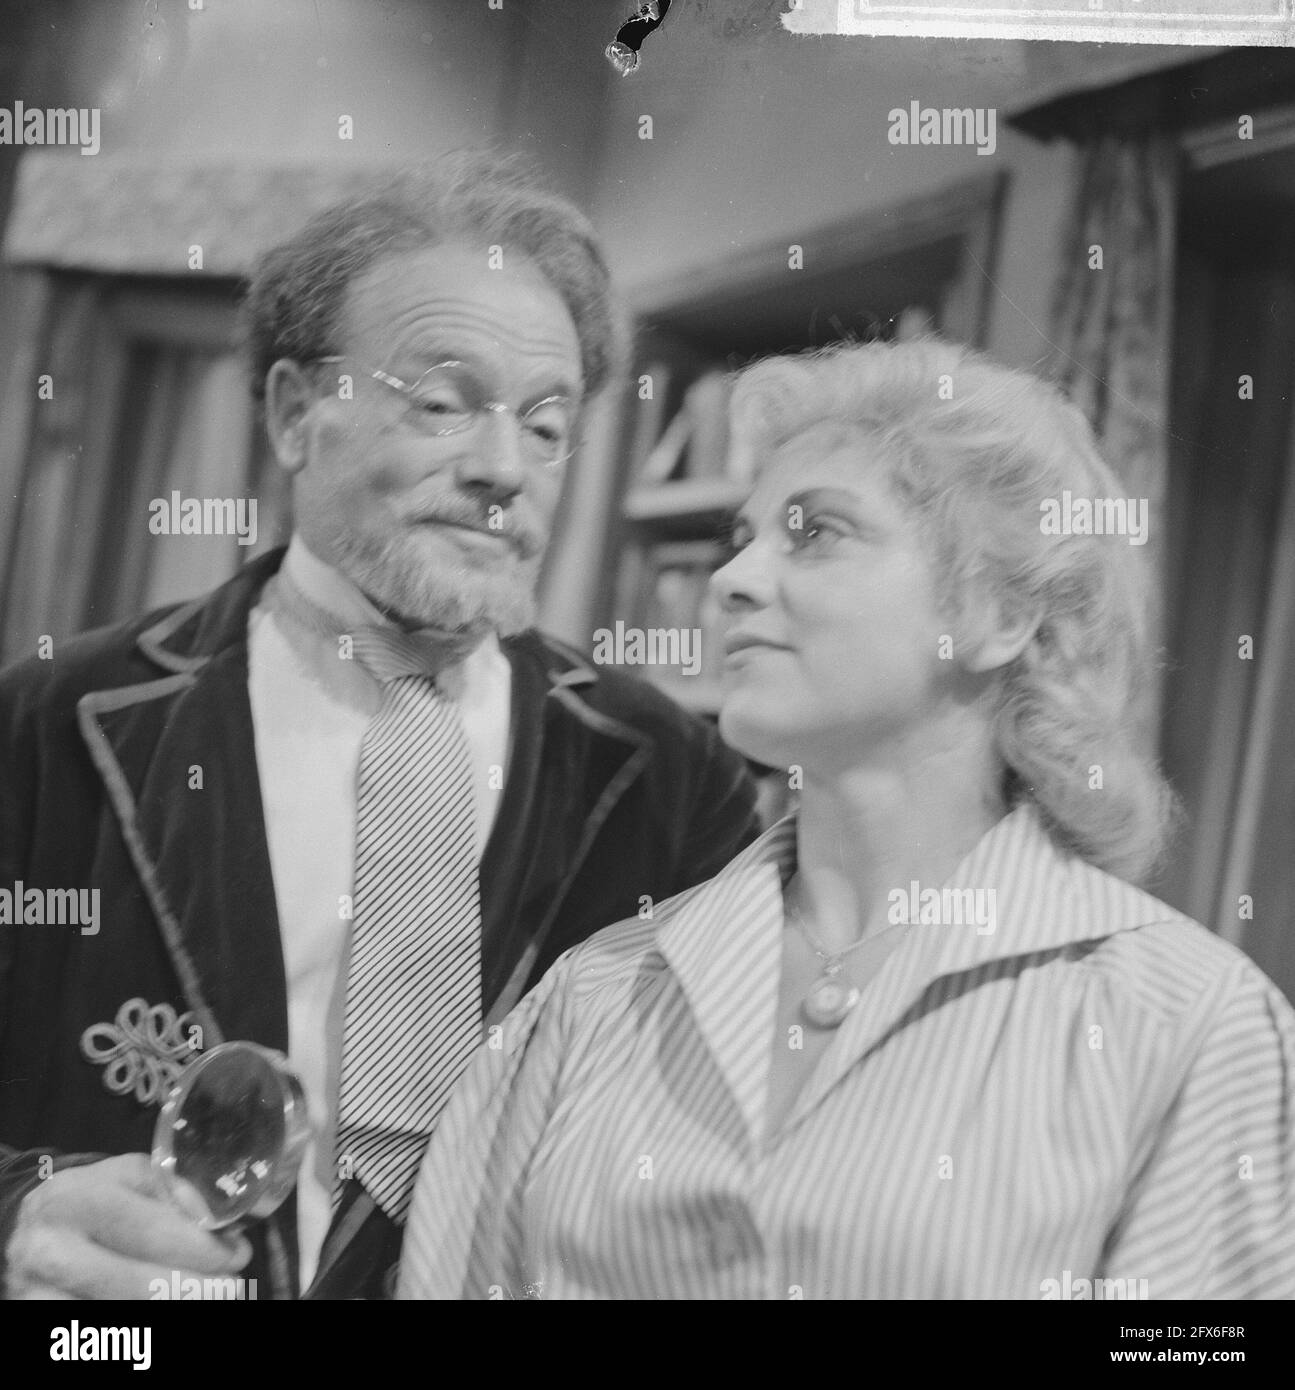 He's at the Crucible, a TV play by VPRO. Max Croiset as Professor Mensch and Emmy Lopes Dias as Miss Schmidt, October 17, 1962, actors, television dramas, The Netherlands, 20th century press agency photo, news to remember, documentary, historic photography 1945-1990, visual stories, human history of the Twentieth Century, capturing moments in time Stock Photo